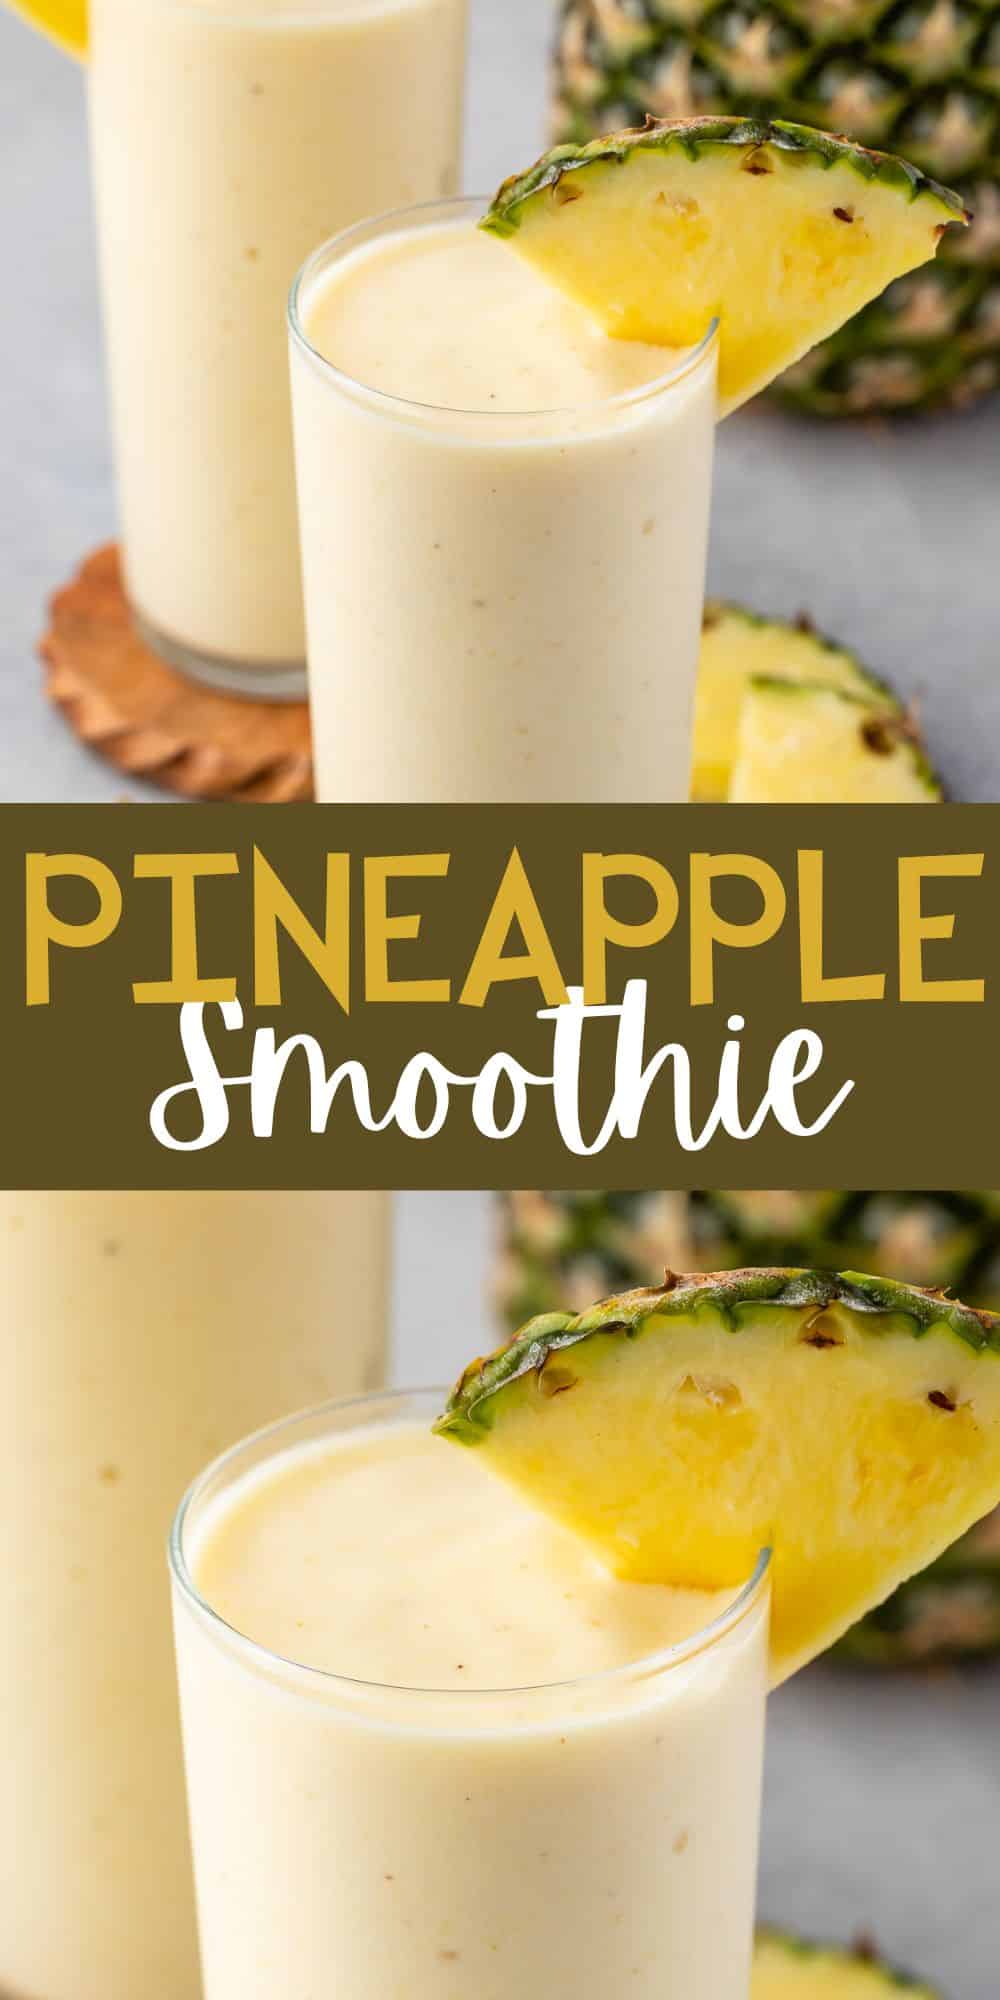 two images of yellow pineapple smoothie in a tall clear glass with a pineapple slice on the rim with words on the image.